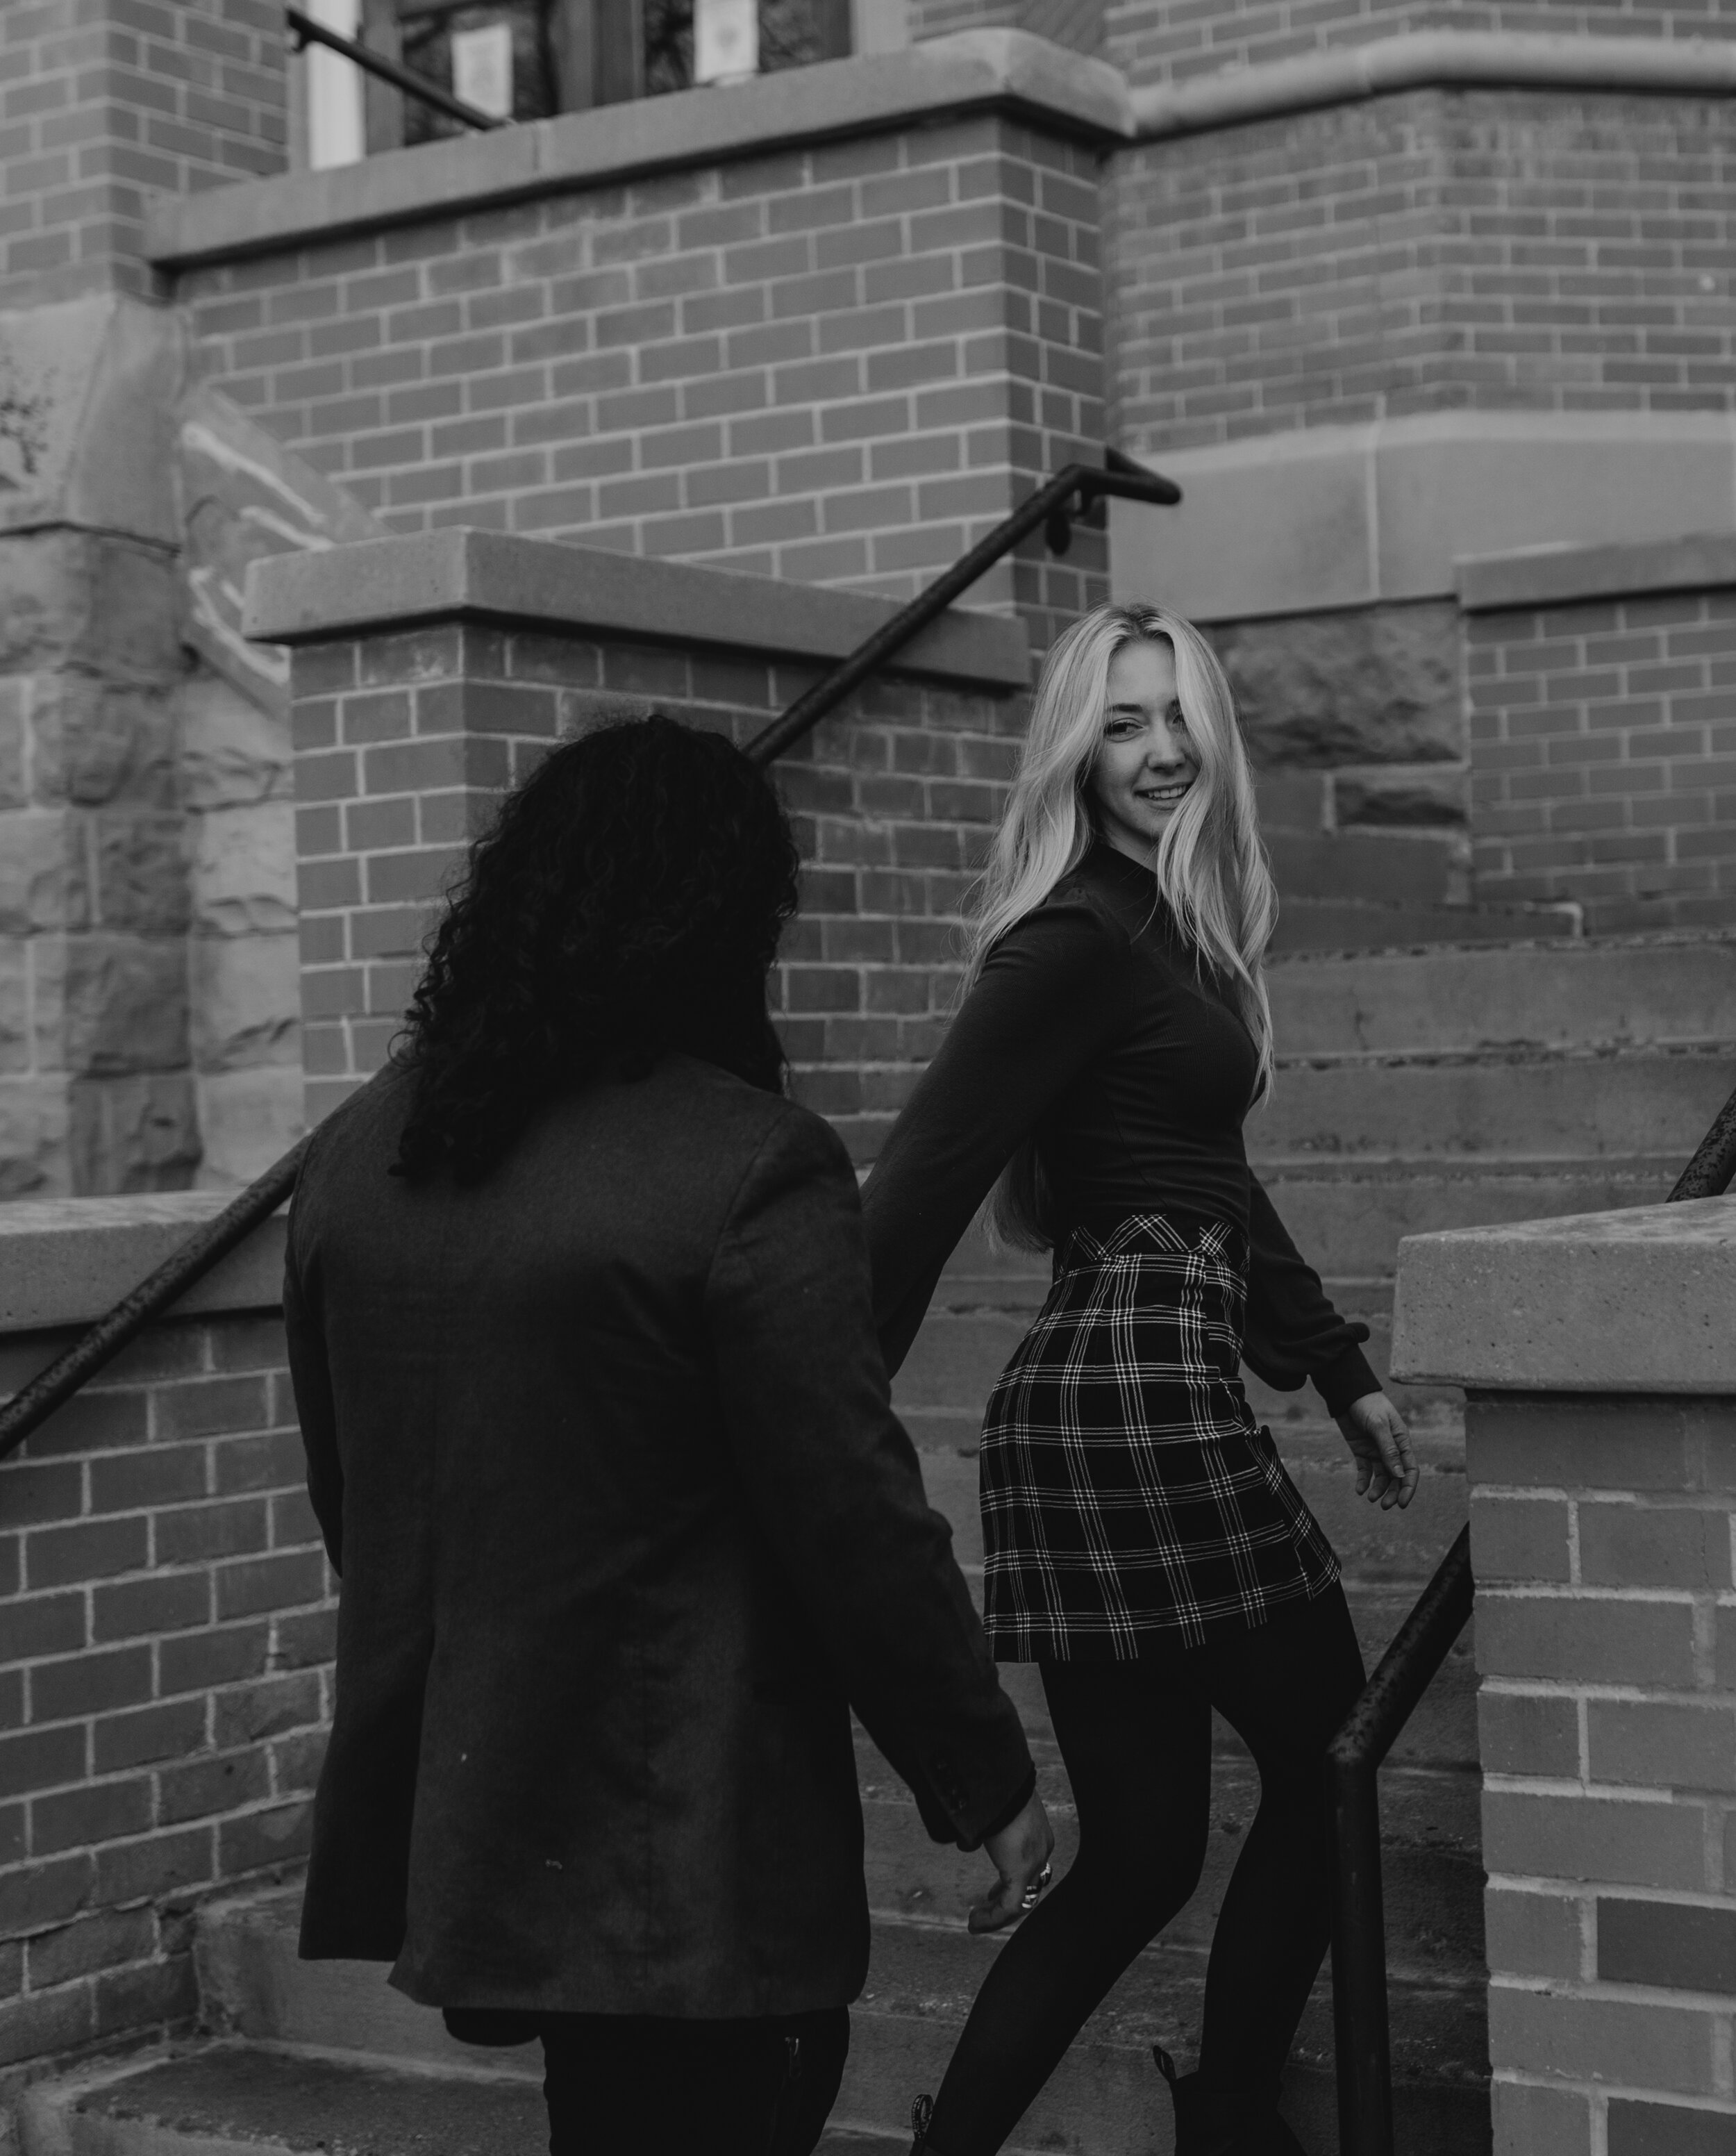 harry-potter-themed-engagement-photos-harry-potter-photoshoot-book-themed-photoshoot-nerd-couple-photoshoot-brayden-and-syd-photography